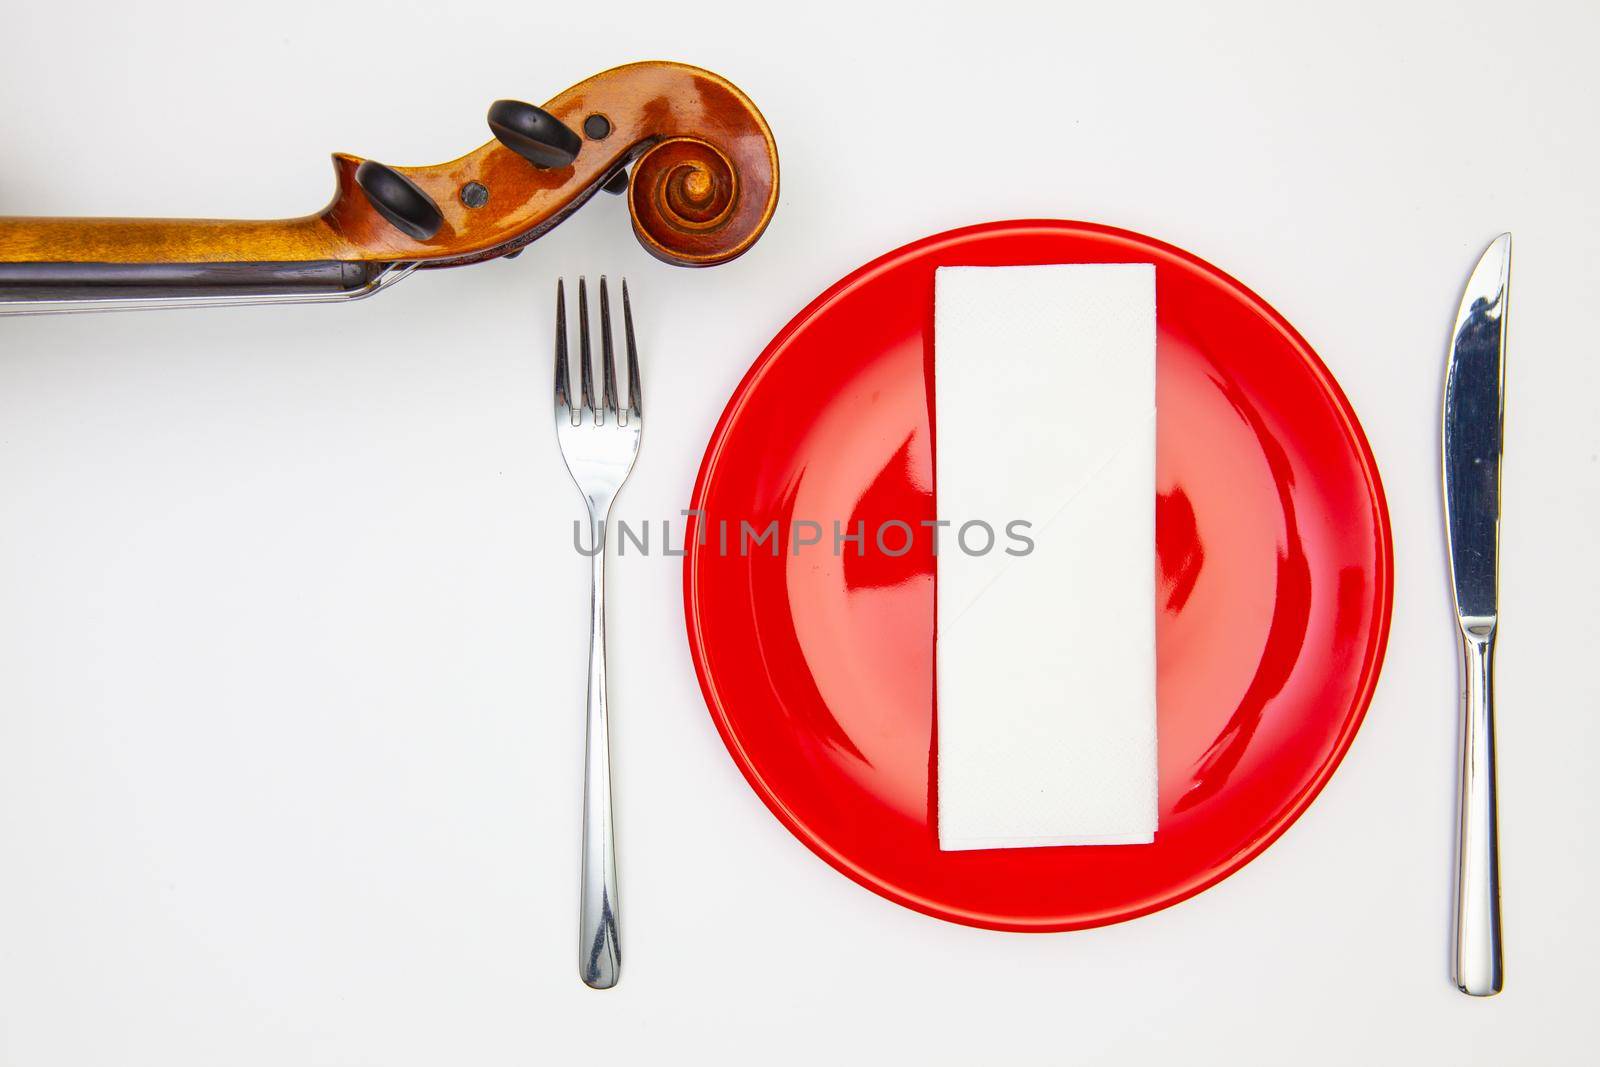 Symphony of taste. Red plate and old violin on the white  wooden table.Top view. Flat Lay Image.